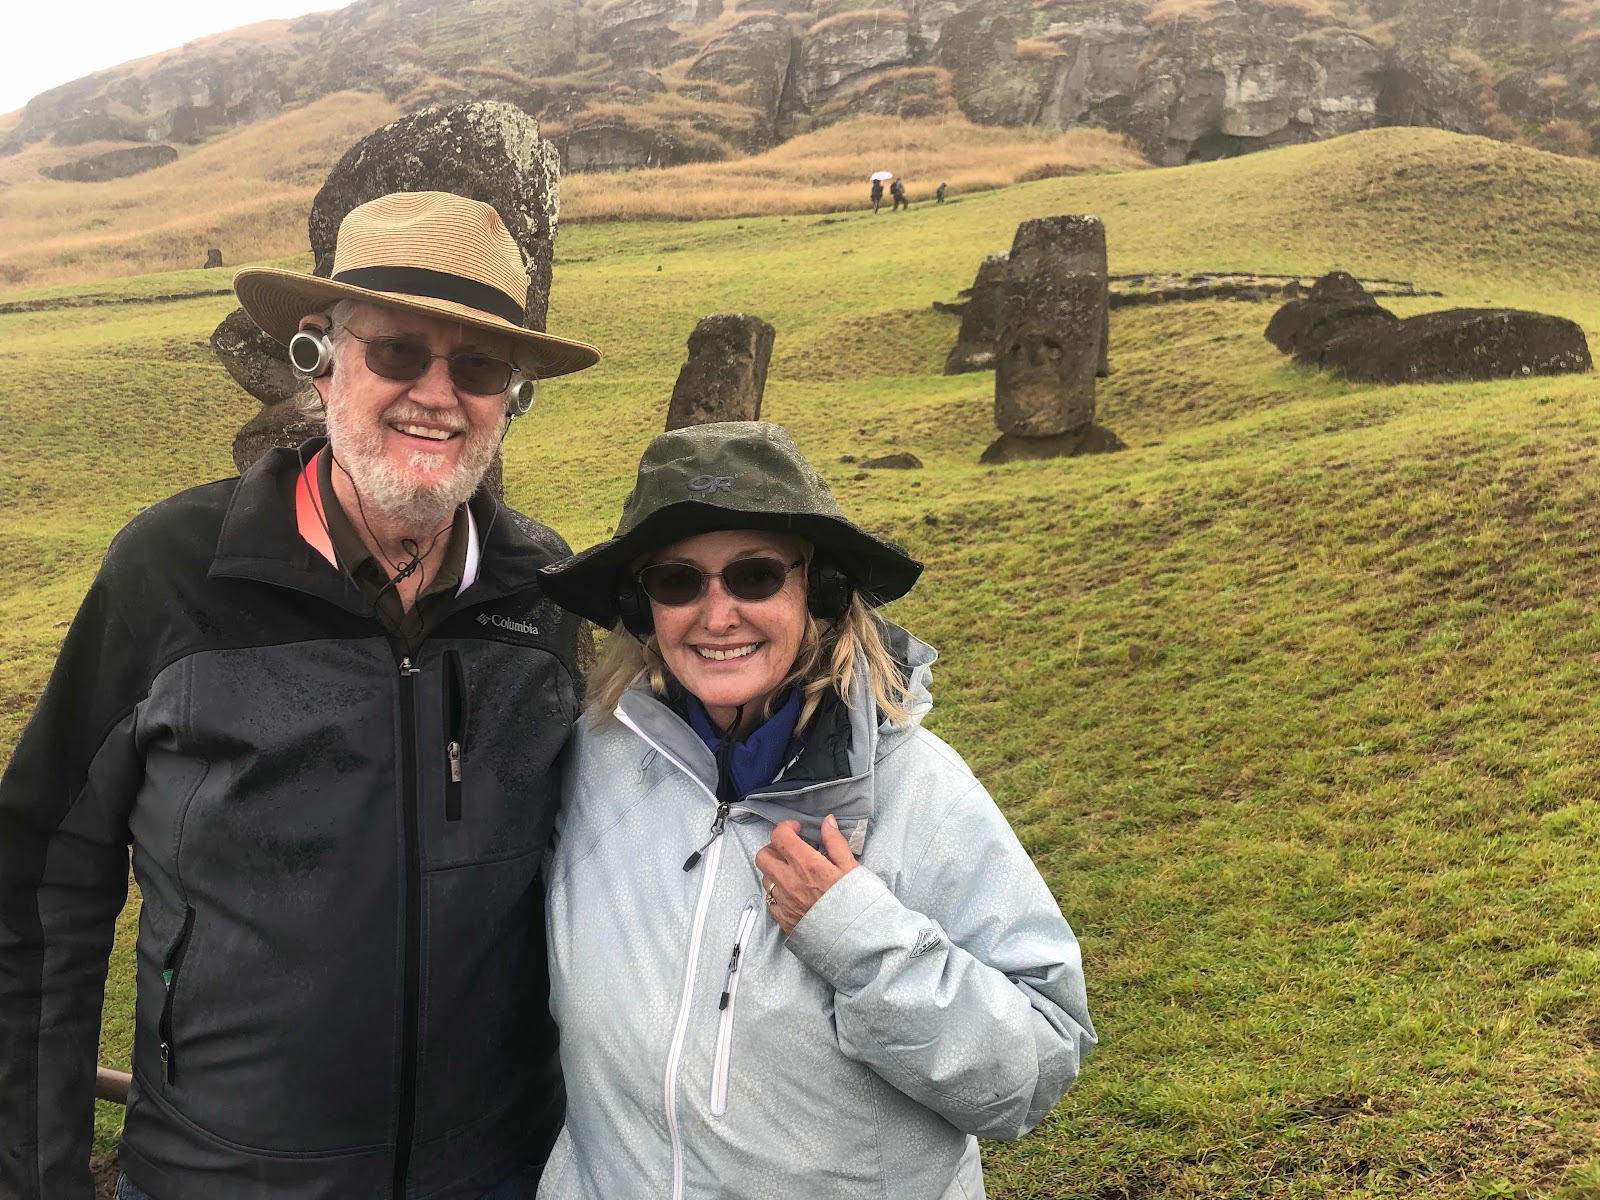 Resident Astronomers George and Peggy stop to pose at the Moai quarry (Source: Palmia Observatory)